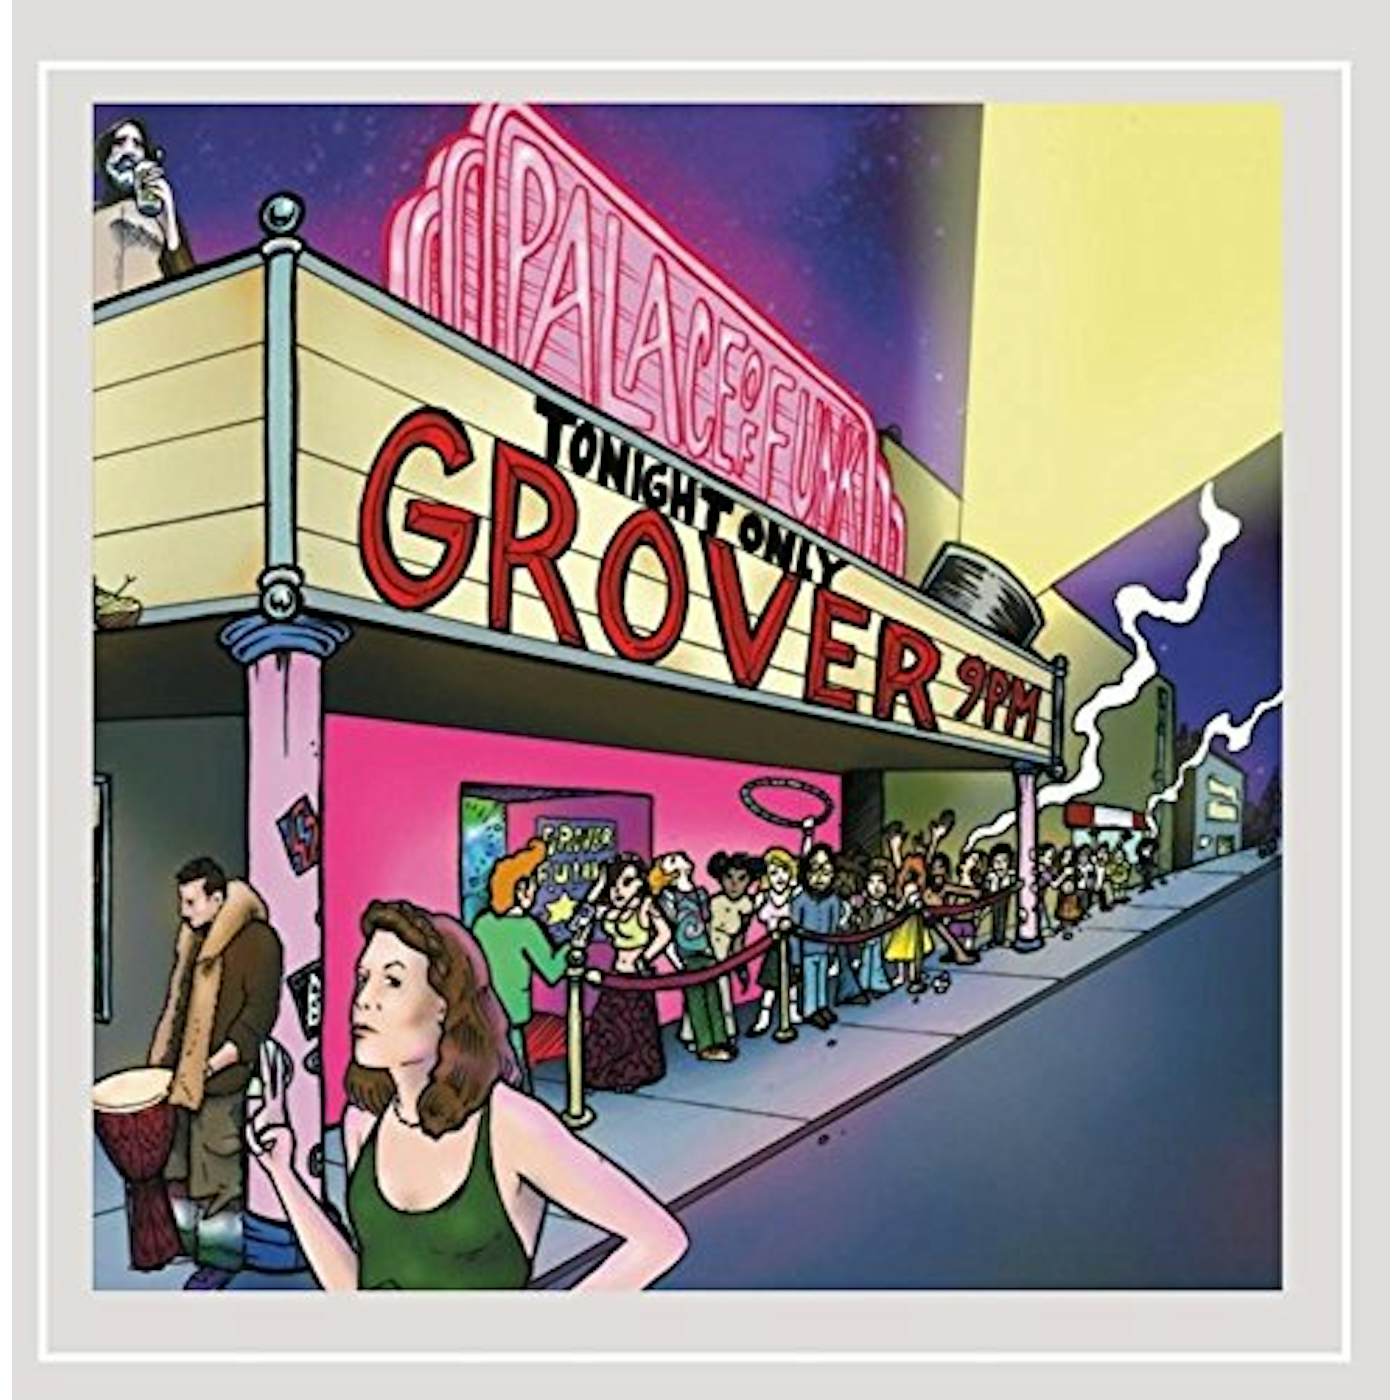 Grover TONIGHT ONLY CD